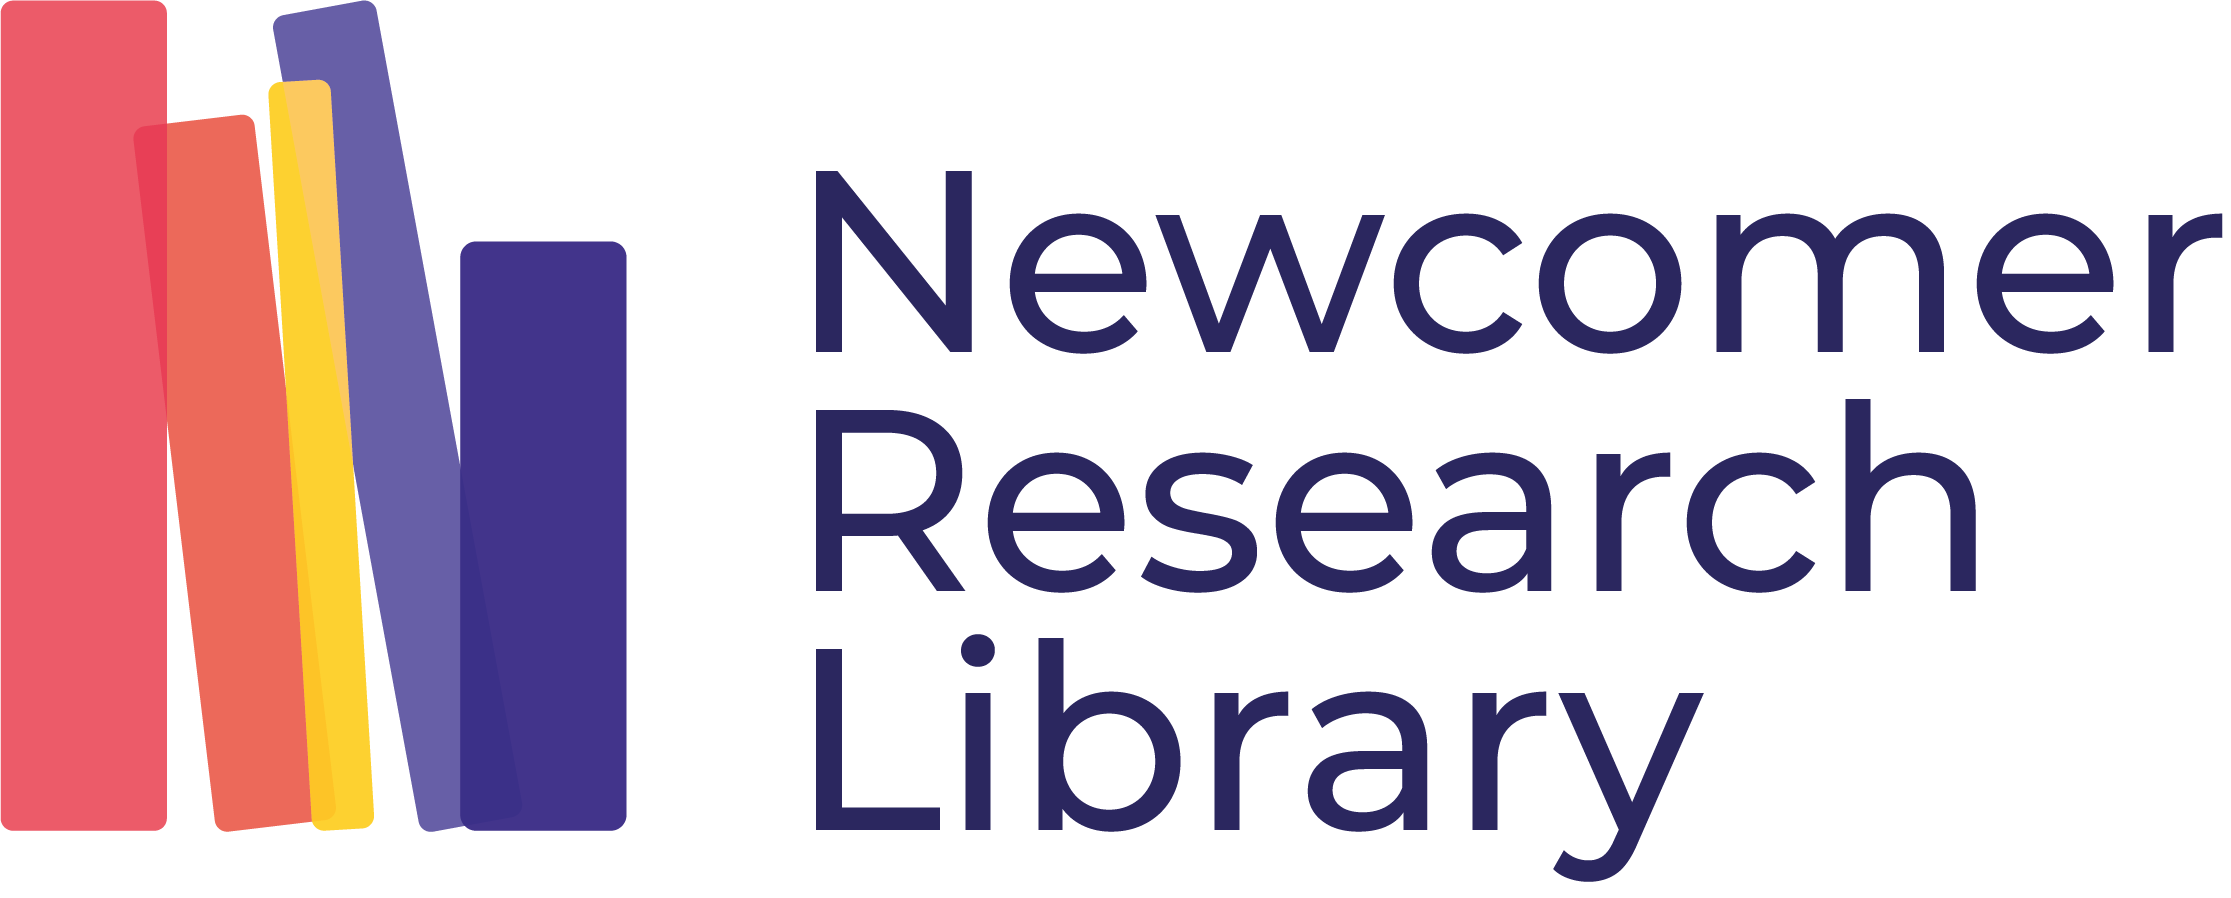 Newcomer research library footer logo